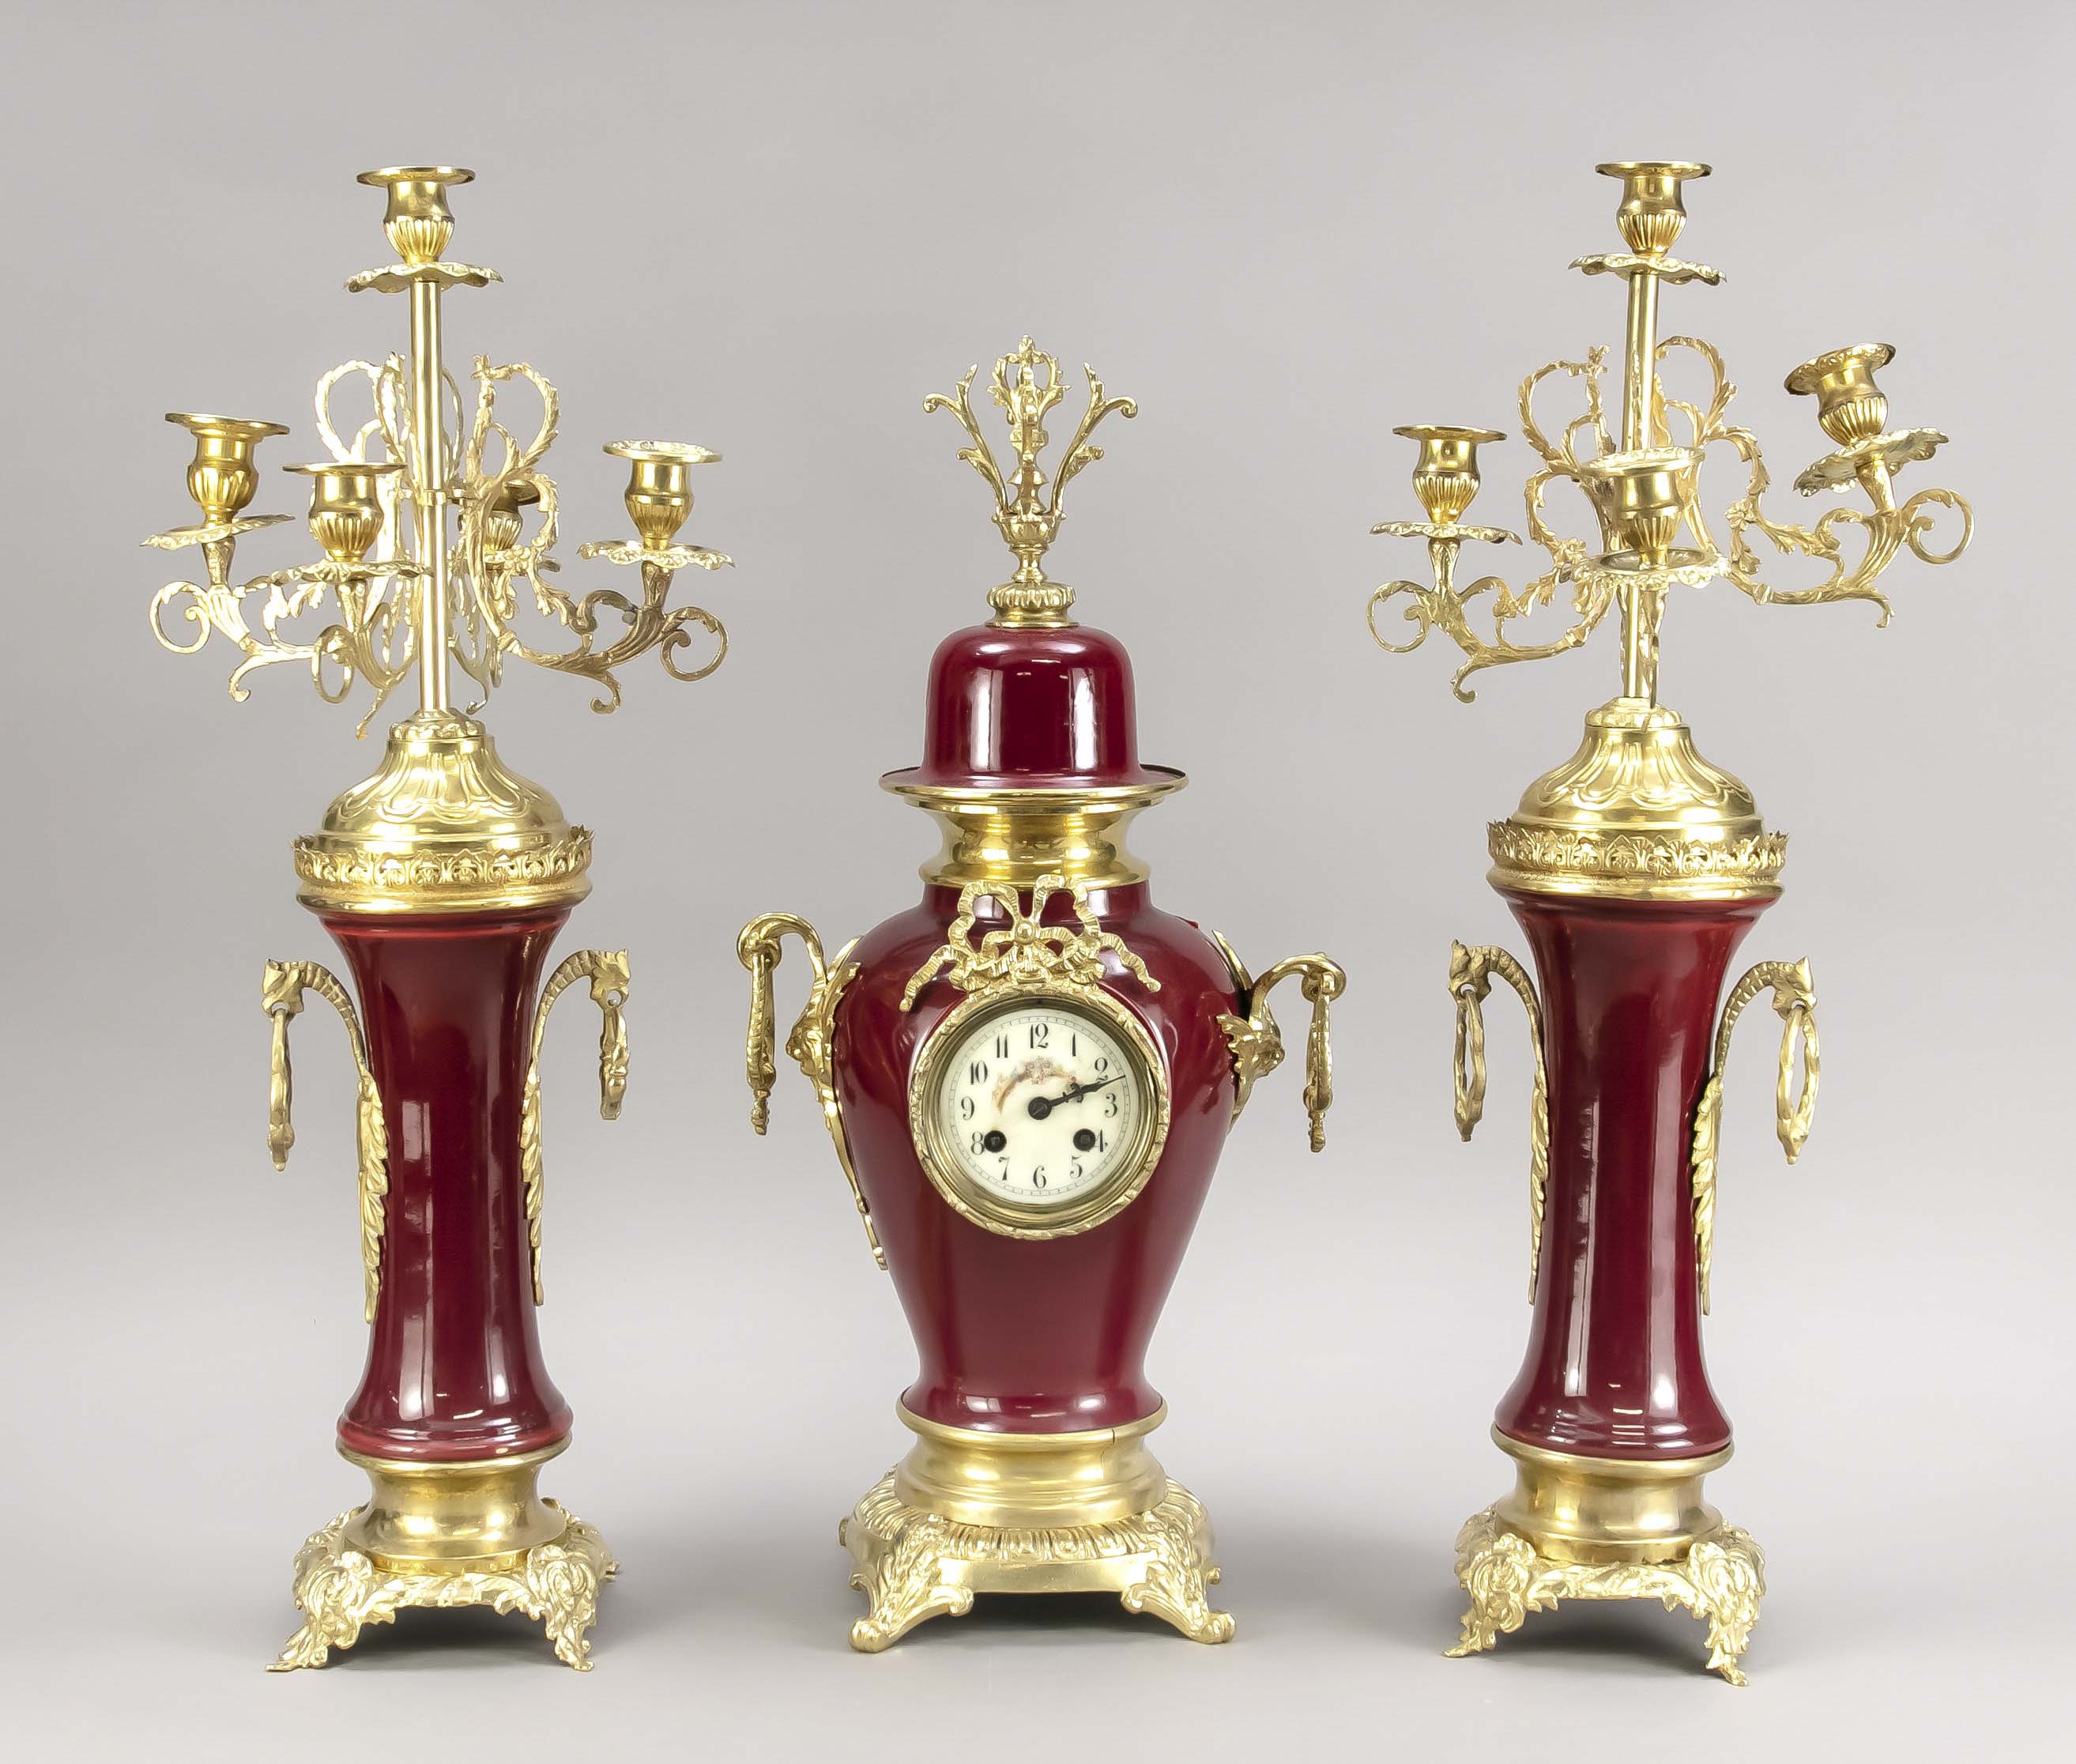 Porcelain pendulum, 2nd half of the 19th century, wine-red background, with corresponding urns,